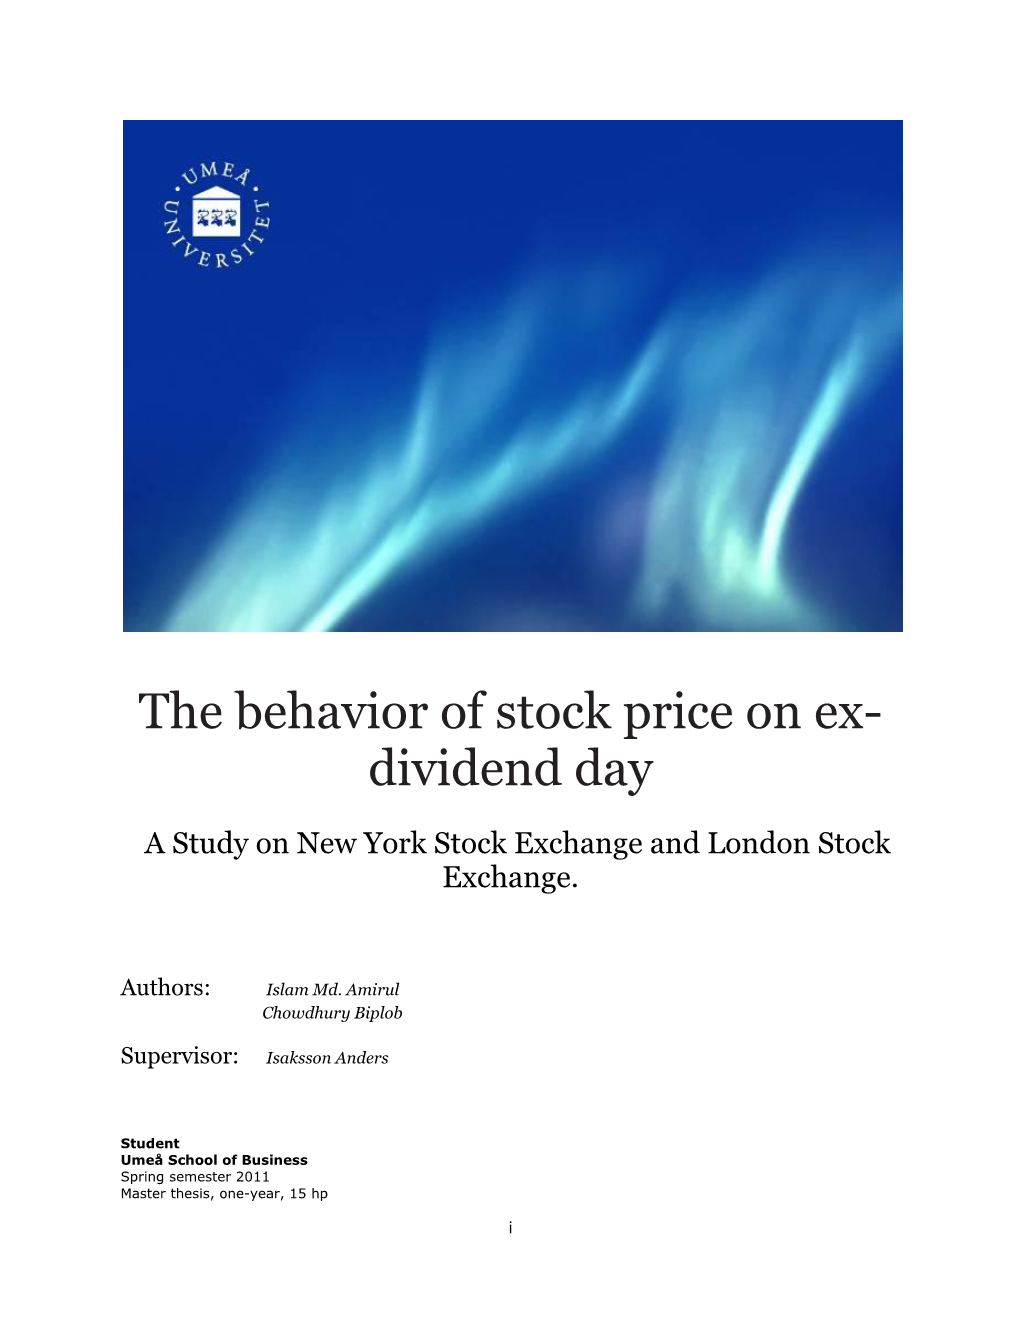 The Behavior of Stock Price on Ex- Dividend Day